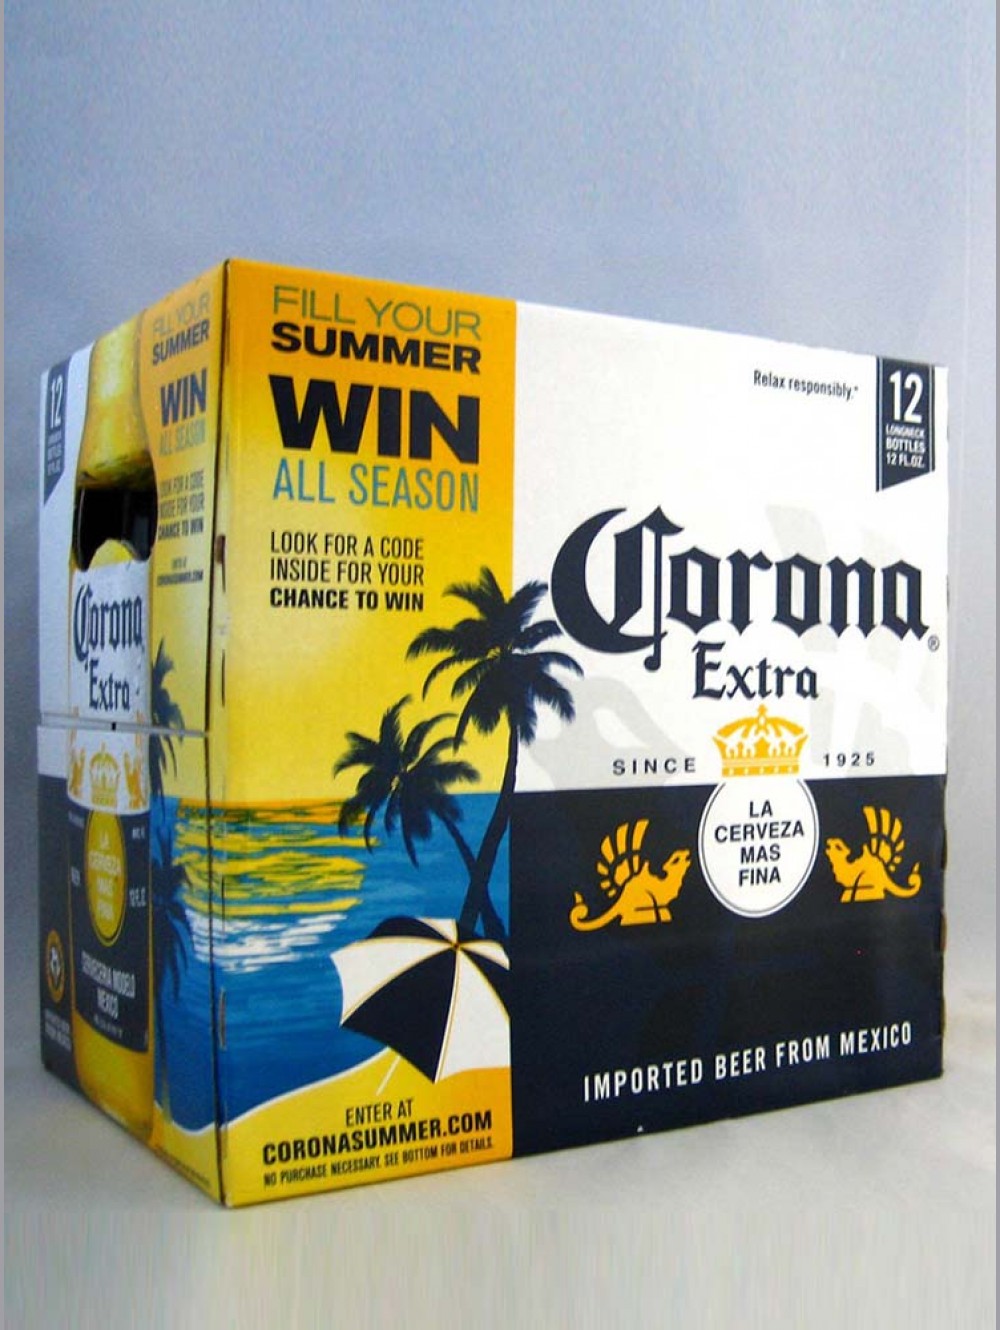 ORDER CORONA EXTRA LAGER BEER